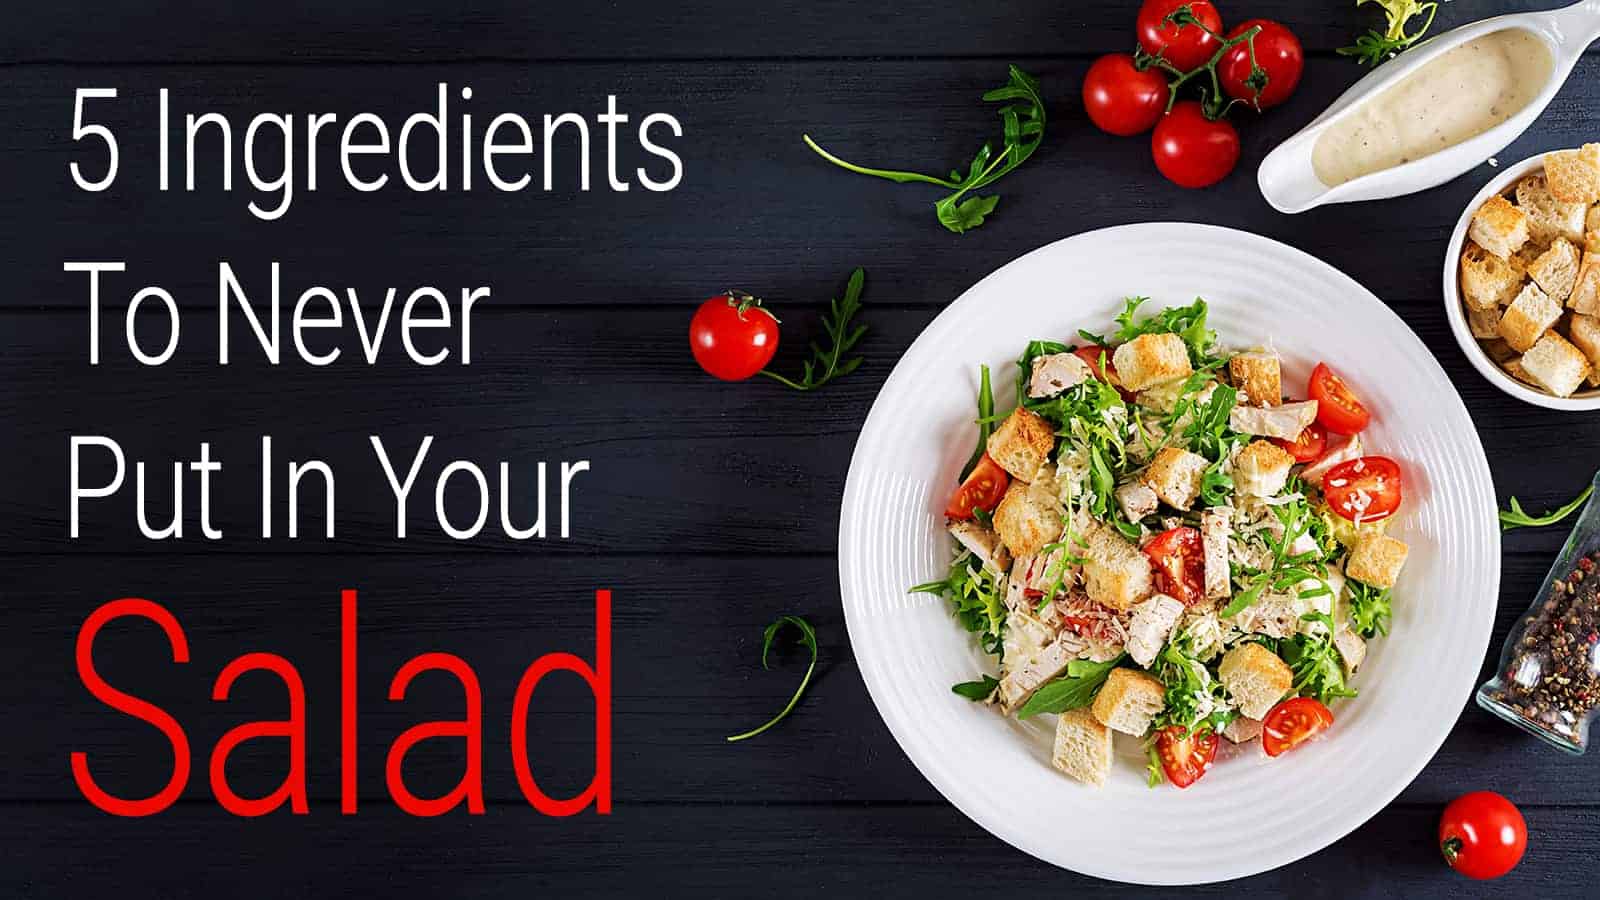 5 Ingredients To Never Put In Your Salad